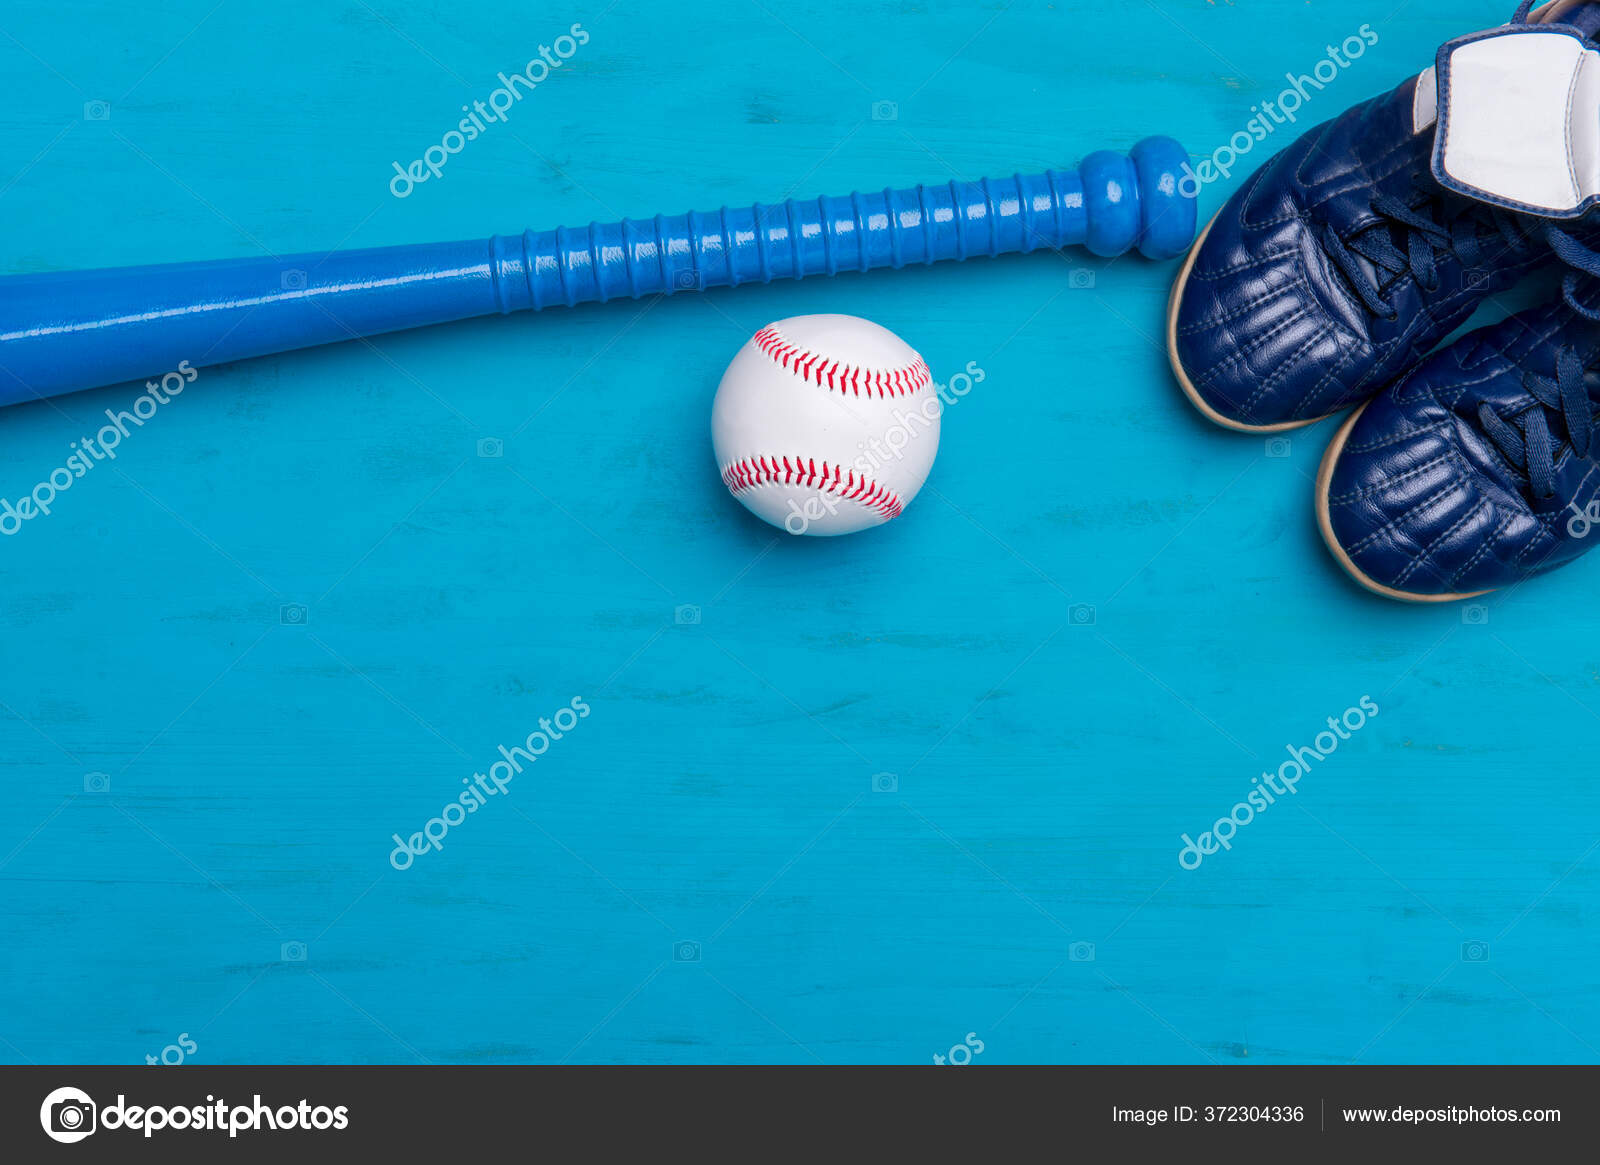 Baseball Equipment Blue Wooden Background Online Workout Concept Stock Photo by ©sportoakimirka 372304336